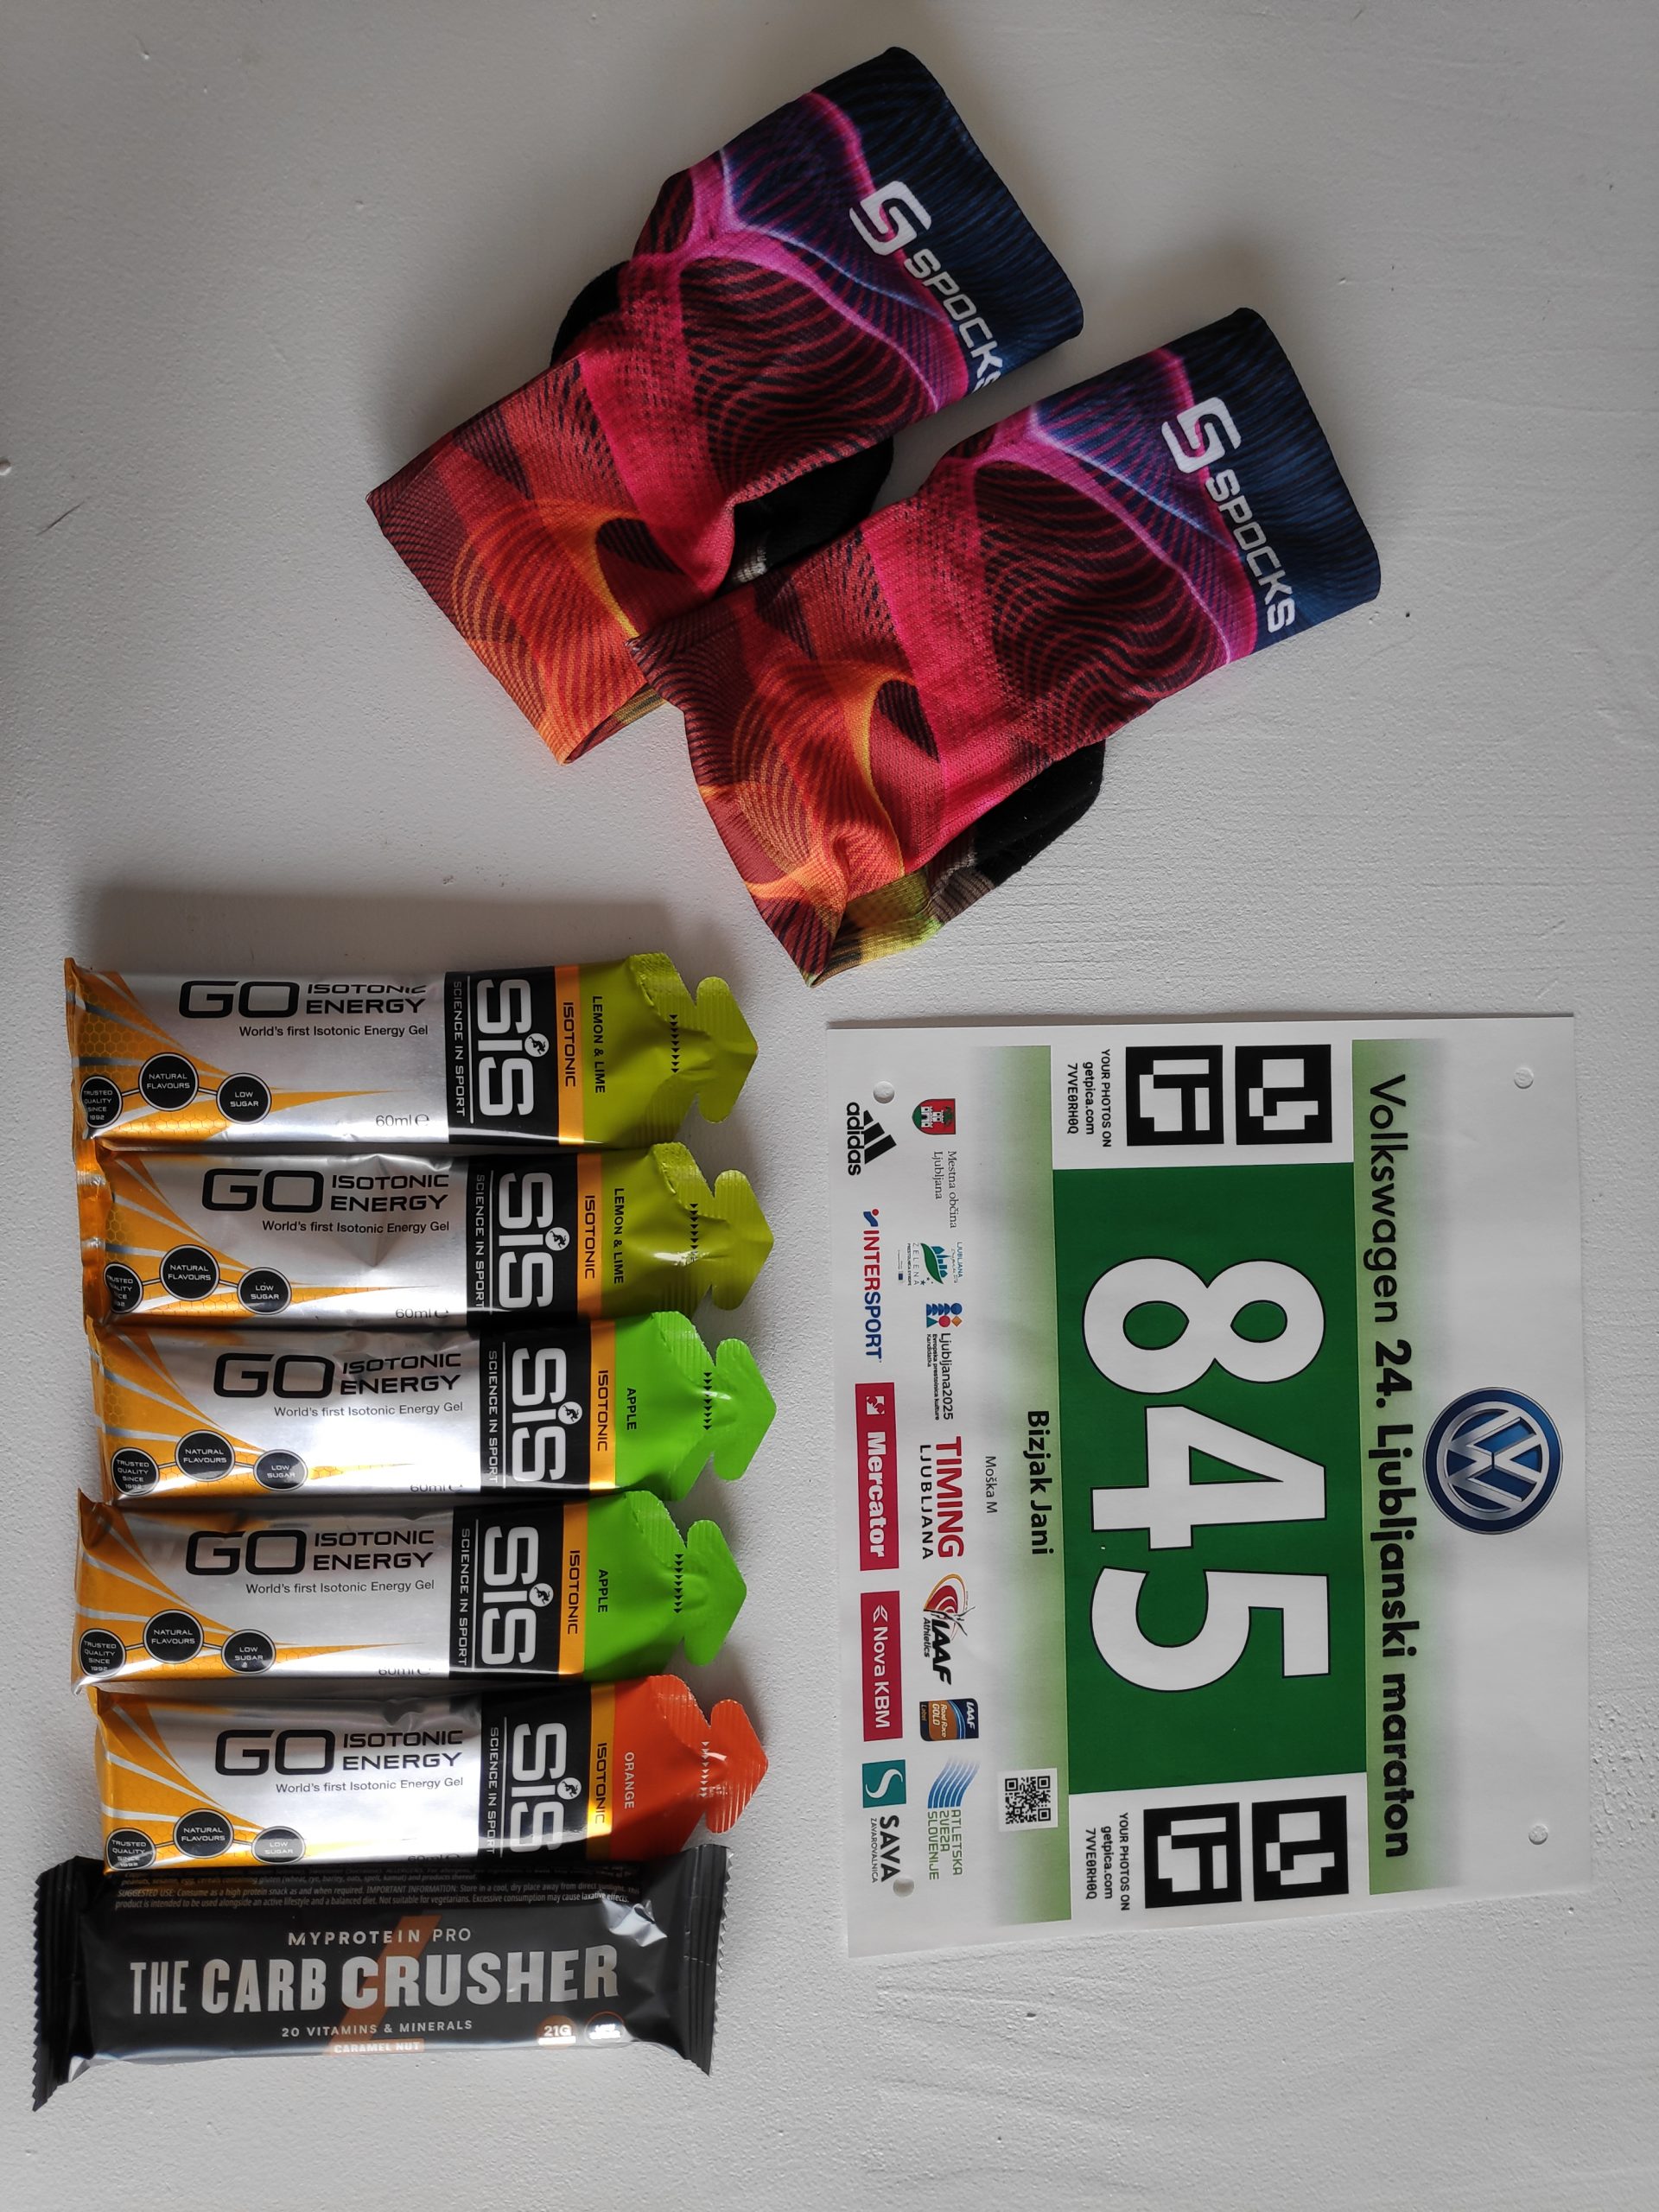 Snack pack. Chocolate bar for before the rest and gels for during the race.